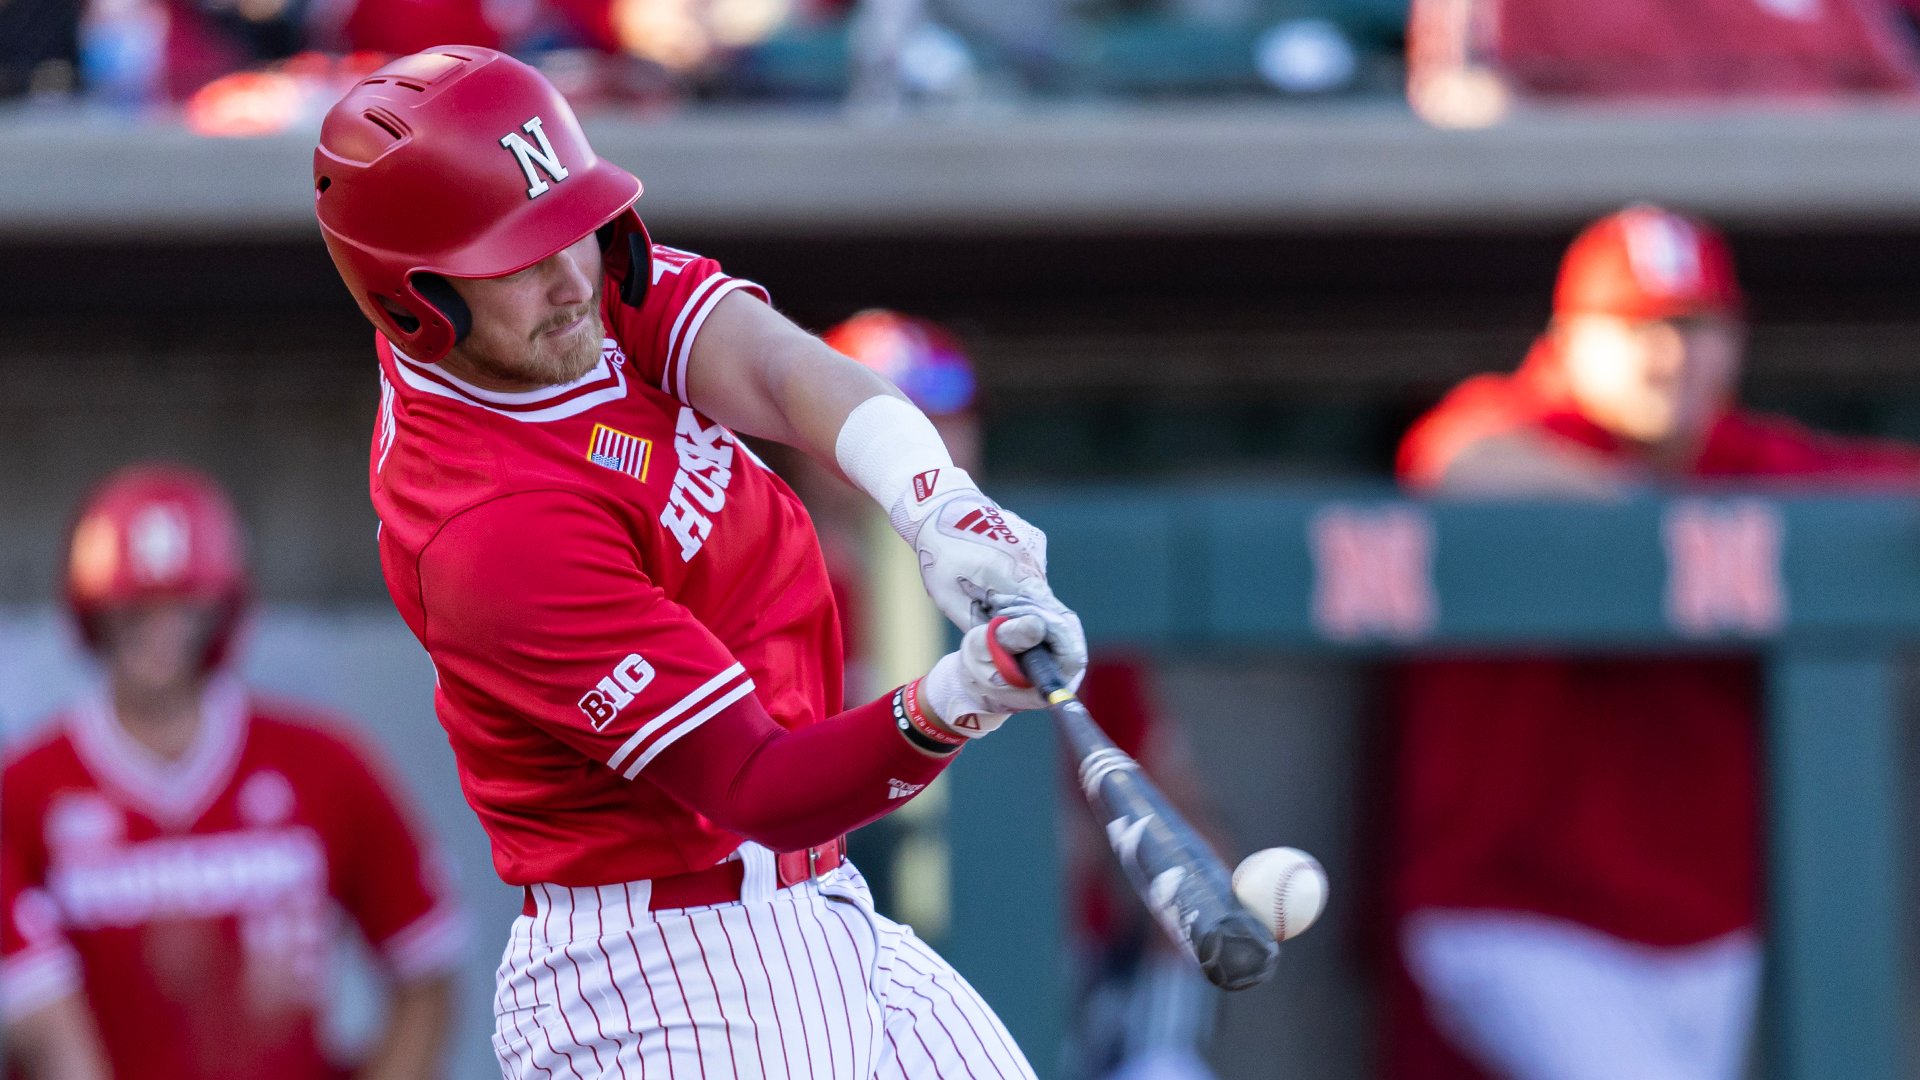 Husker baseball falls behind early, can’t catch up to North Dakota State